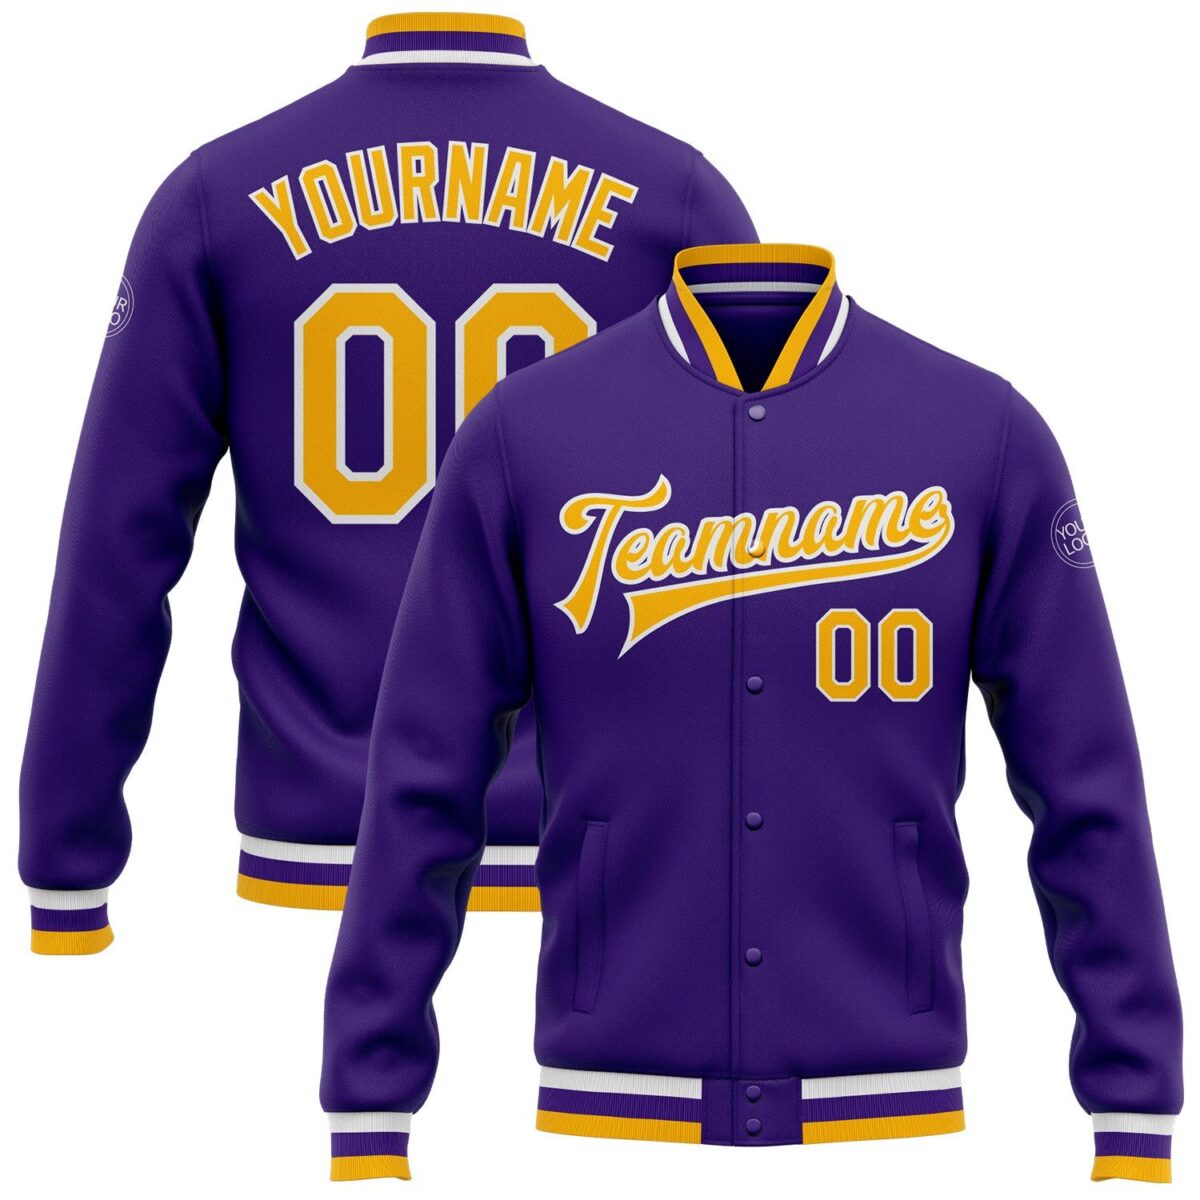 College Student Baseball Jackets with Purple & Yellow 1